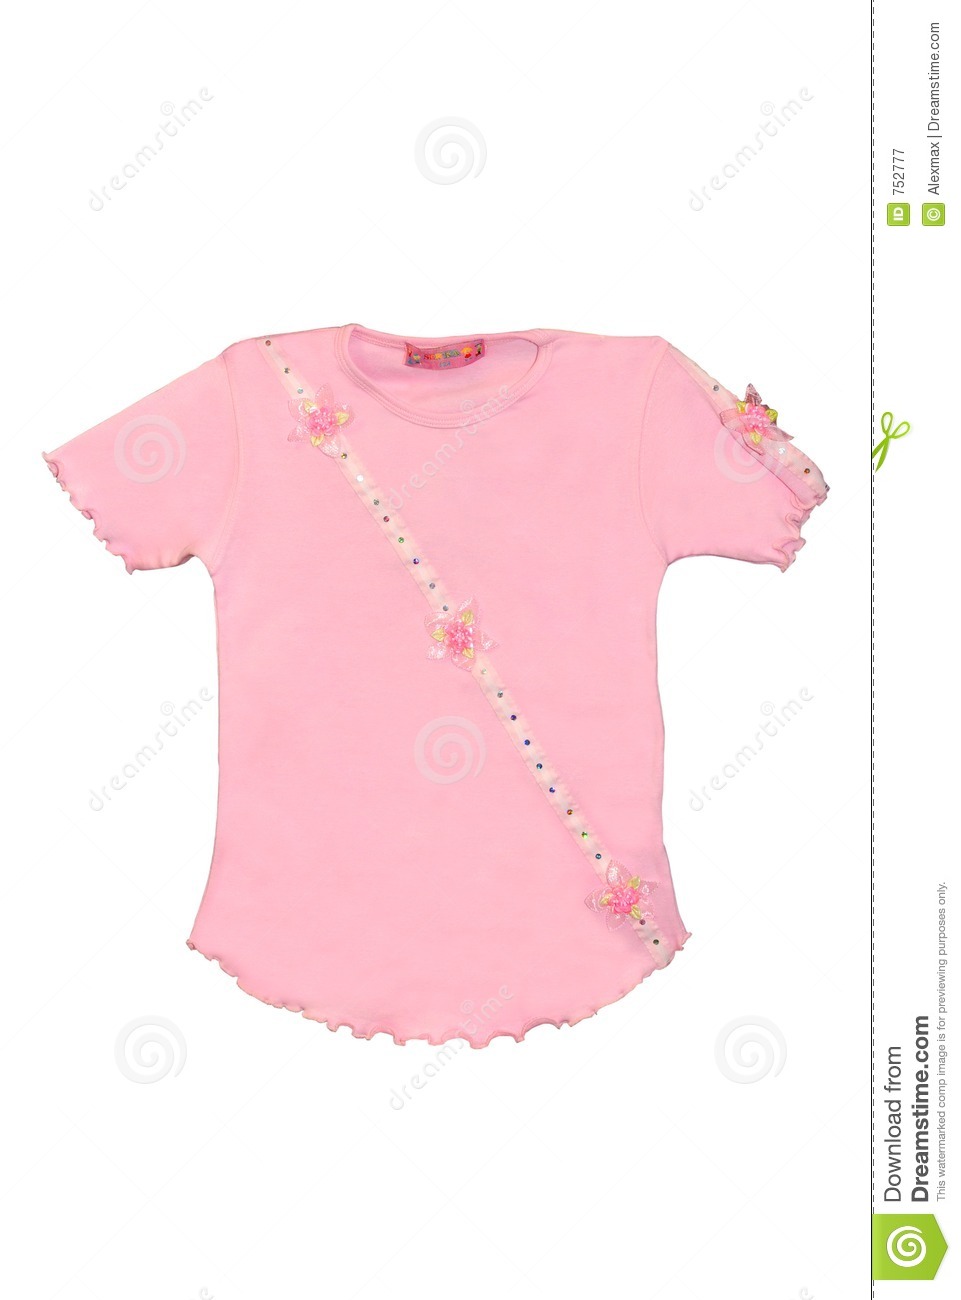 Children Girl Pink T Shirt Isolated Royalty Free Stock Photography    